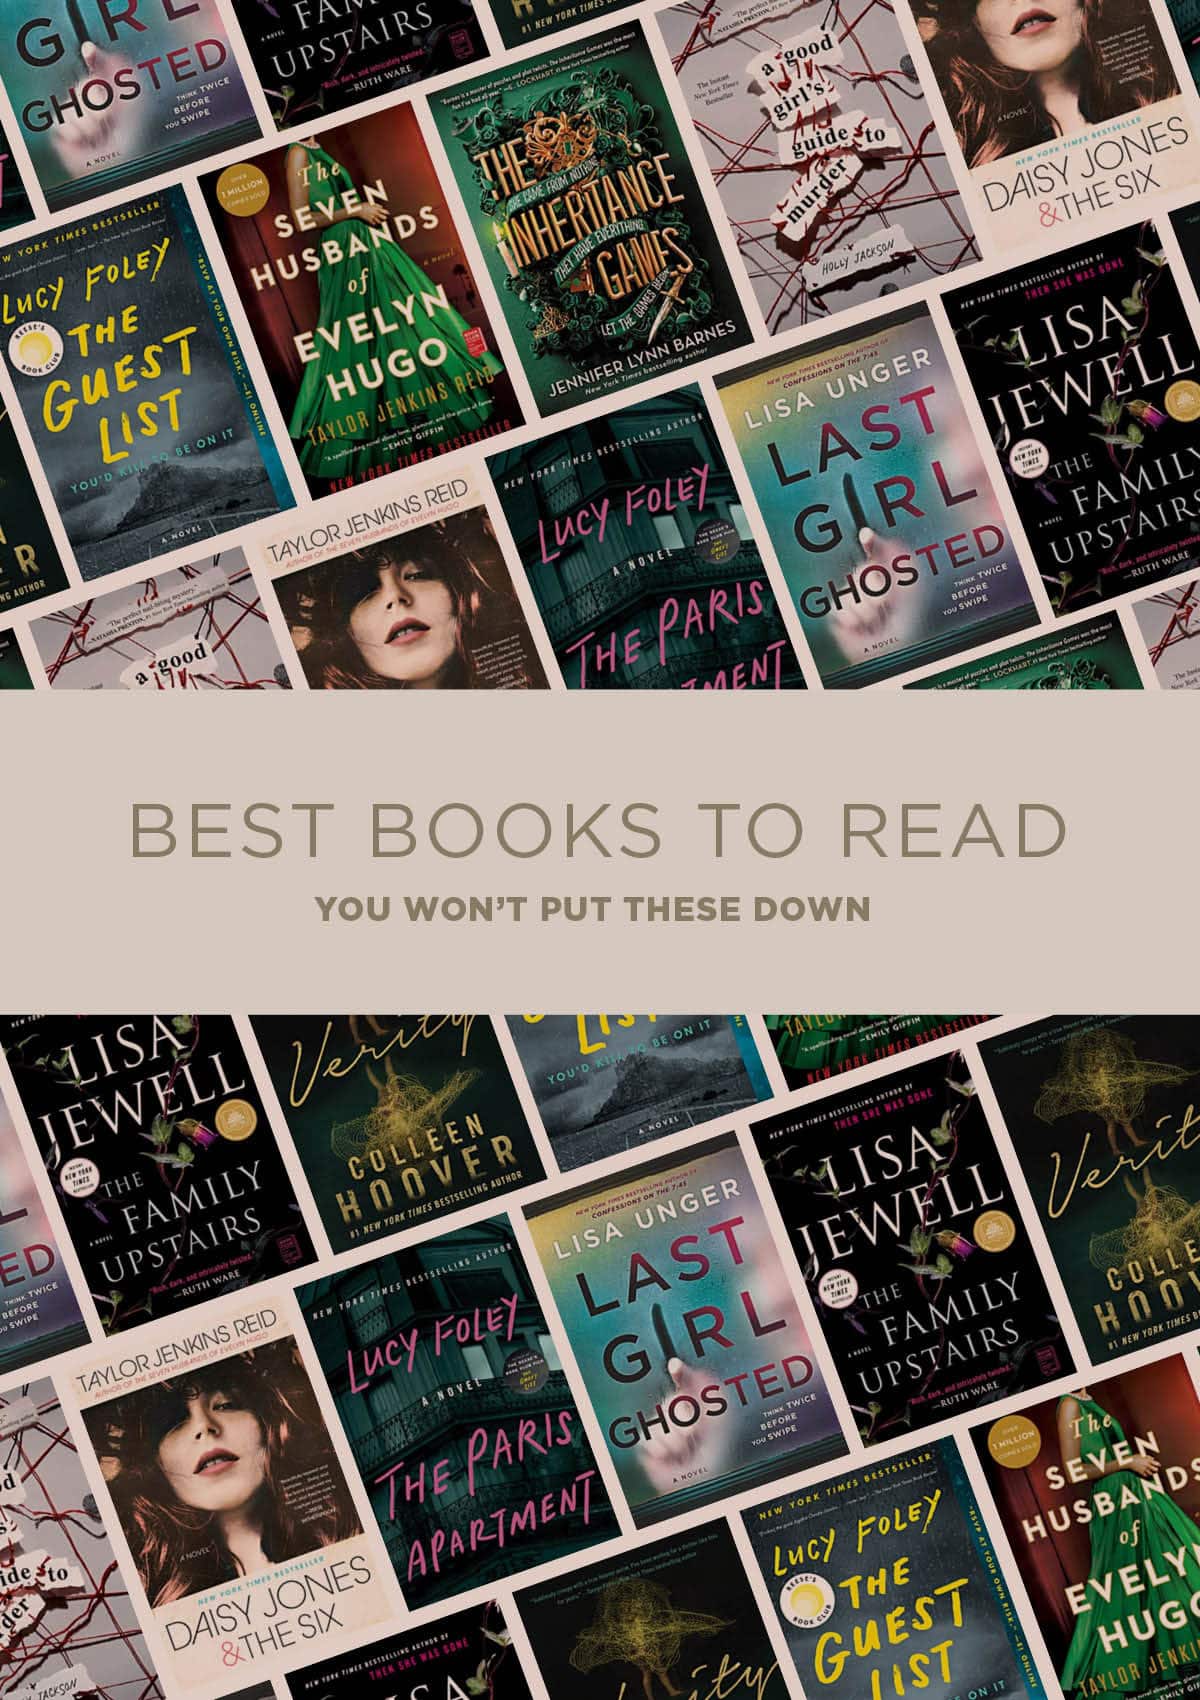 Best Books To Read